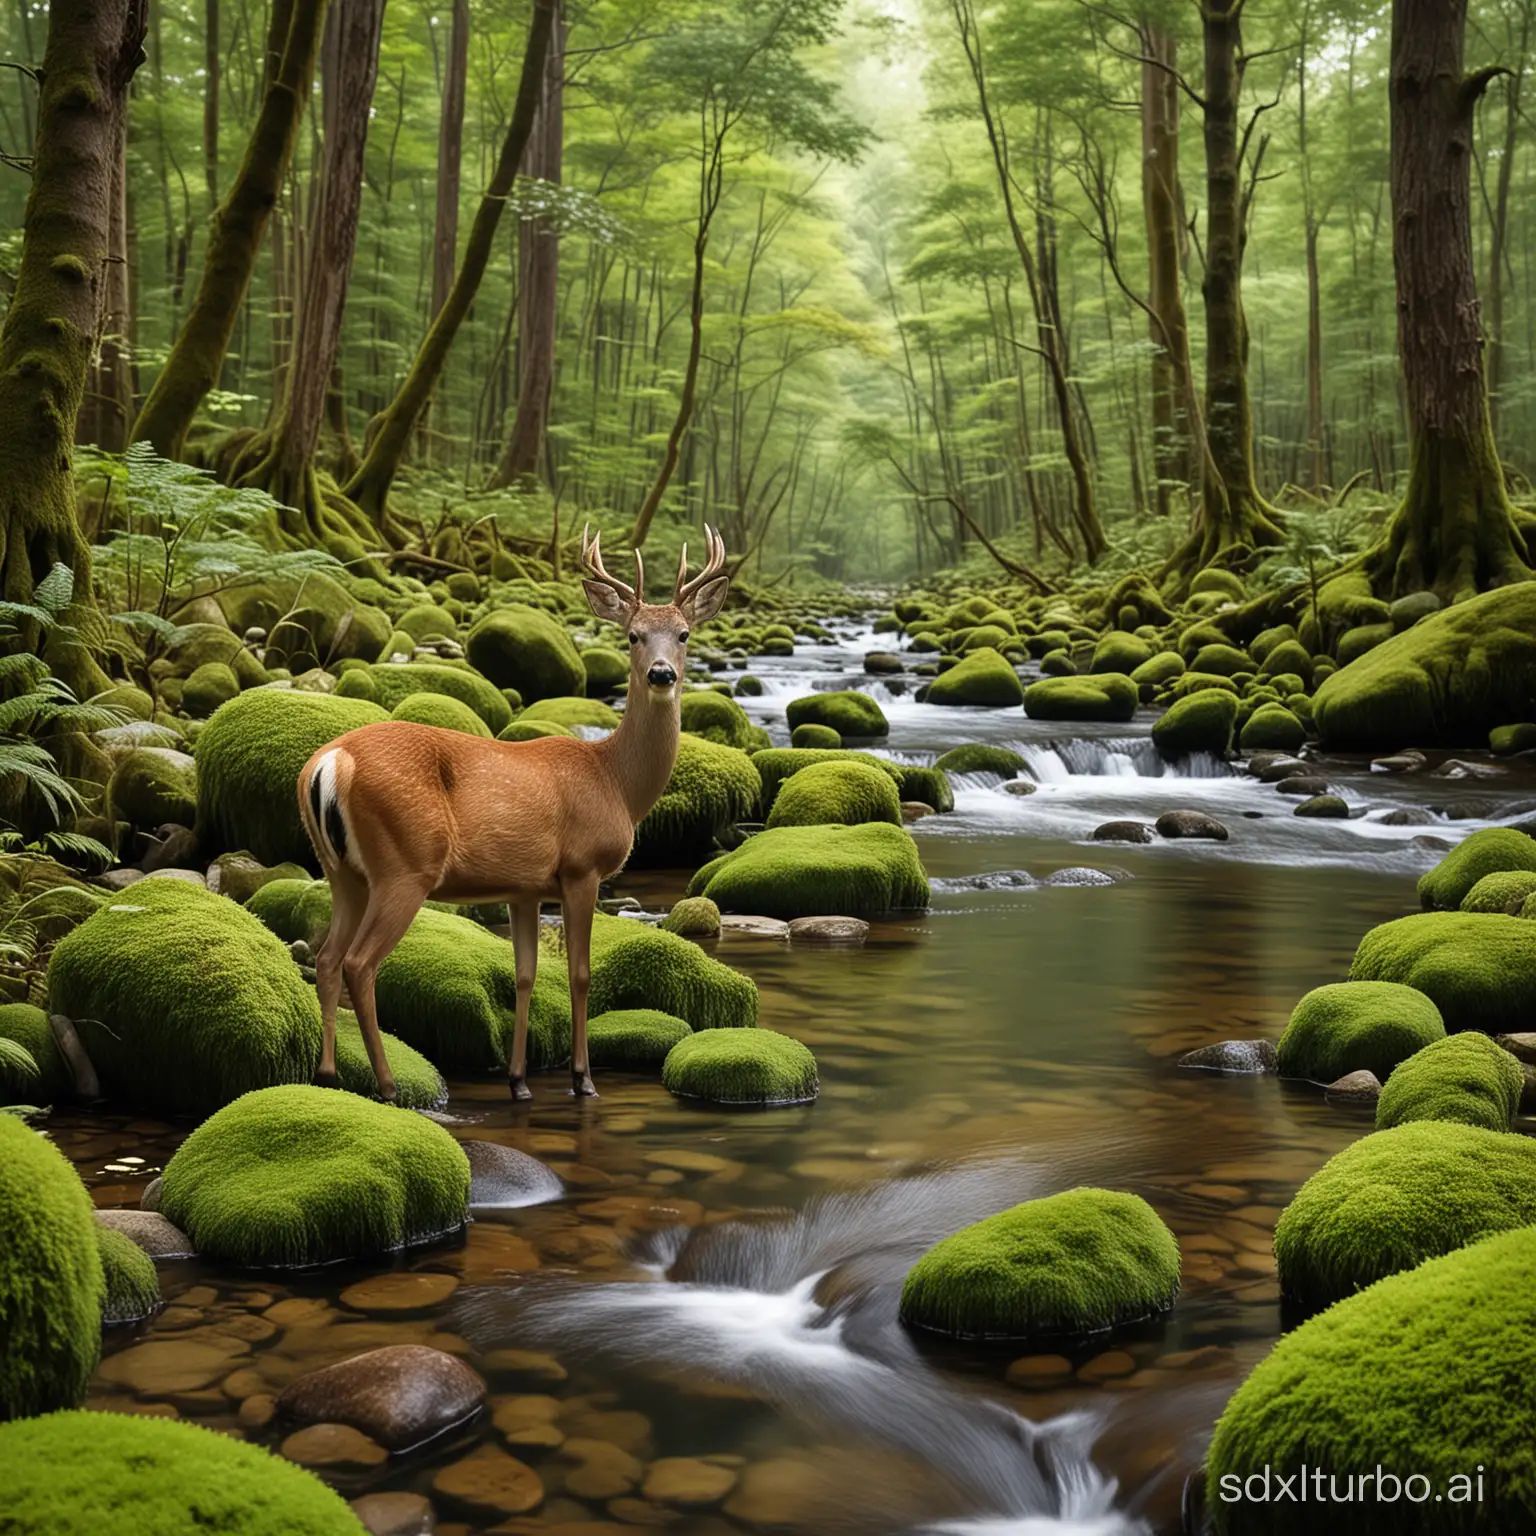 Forest, river, rocks, moss, cute wild deer" A photo of a serene forest scene, where a crystal-clear river flows gently over moss-covered rocks. The lush greenery of the forest creates a tranquil atmosphere, while the moss adds a touch of vibrancy and texture. In the midst of this natural beauty, a cute wild deer appears, its gentle eyes and graceful presence adding a sense of enchantment to the scene. This photo captures the harmony between the elements of nature and evokes a feeling of peace and awe.